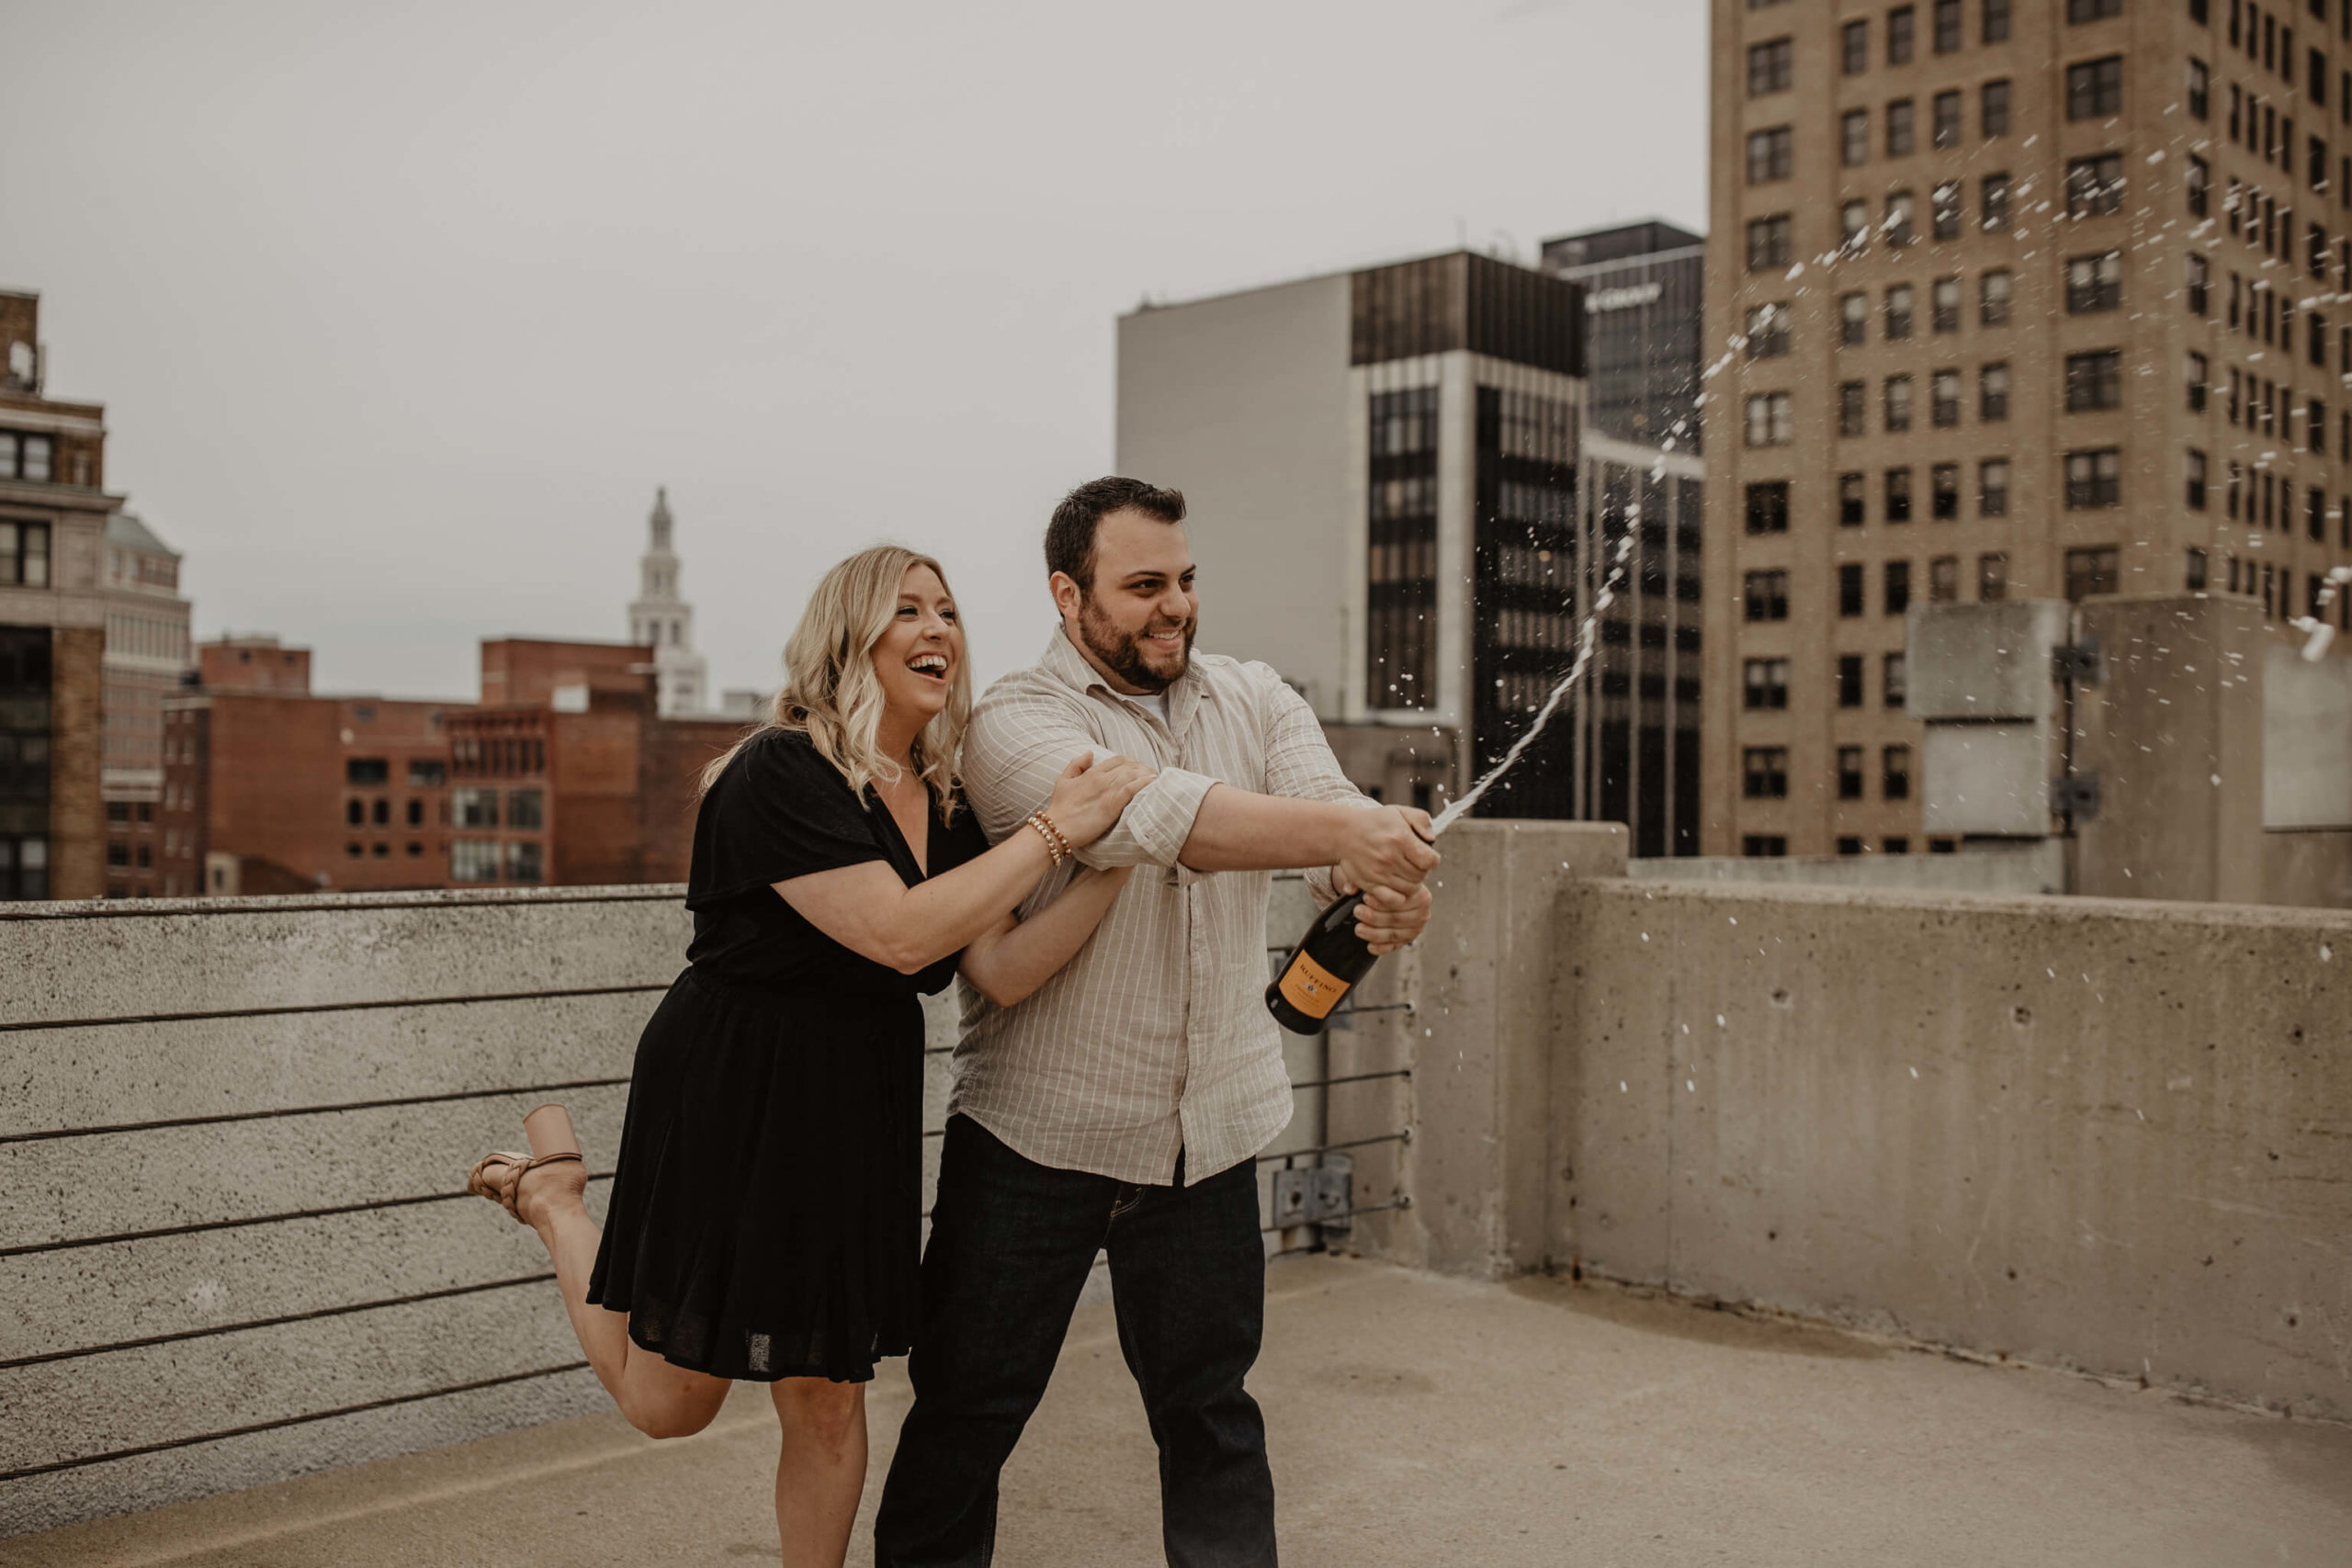 Woman in black dress and man in tan shirt pop champagne on rooftop with city skyline behind them